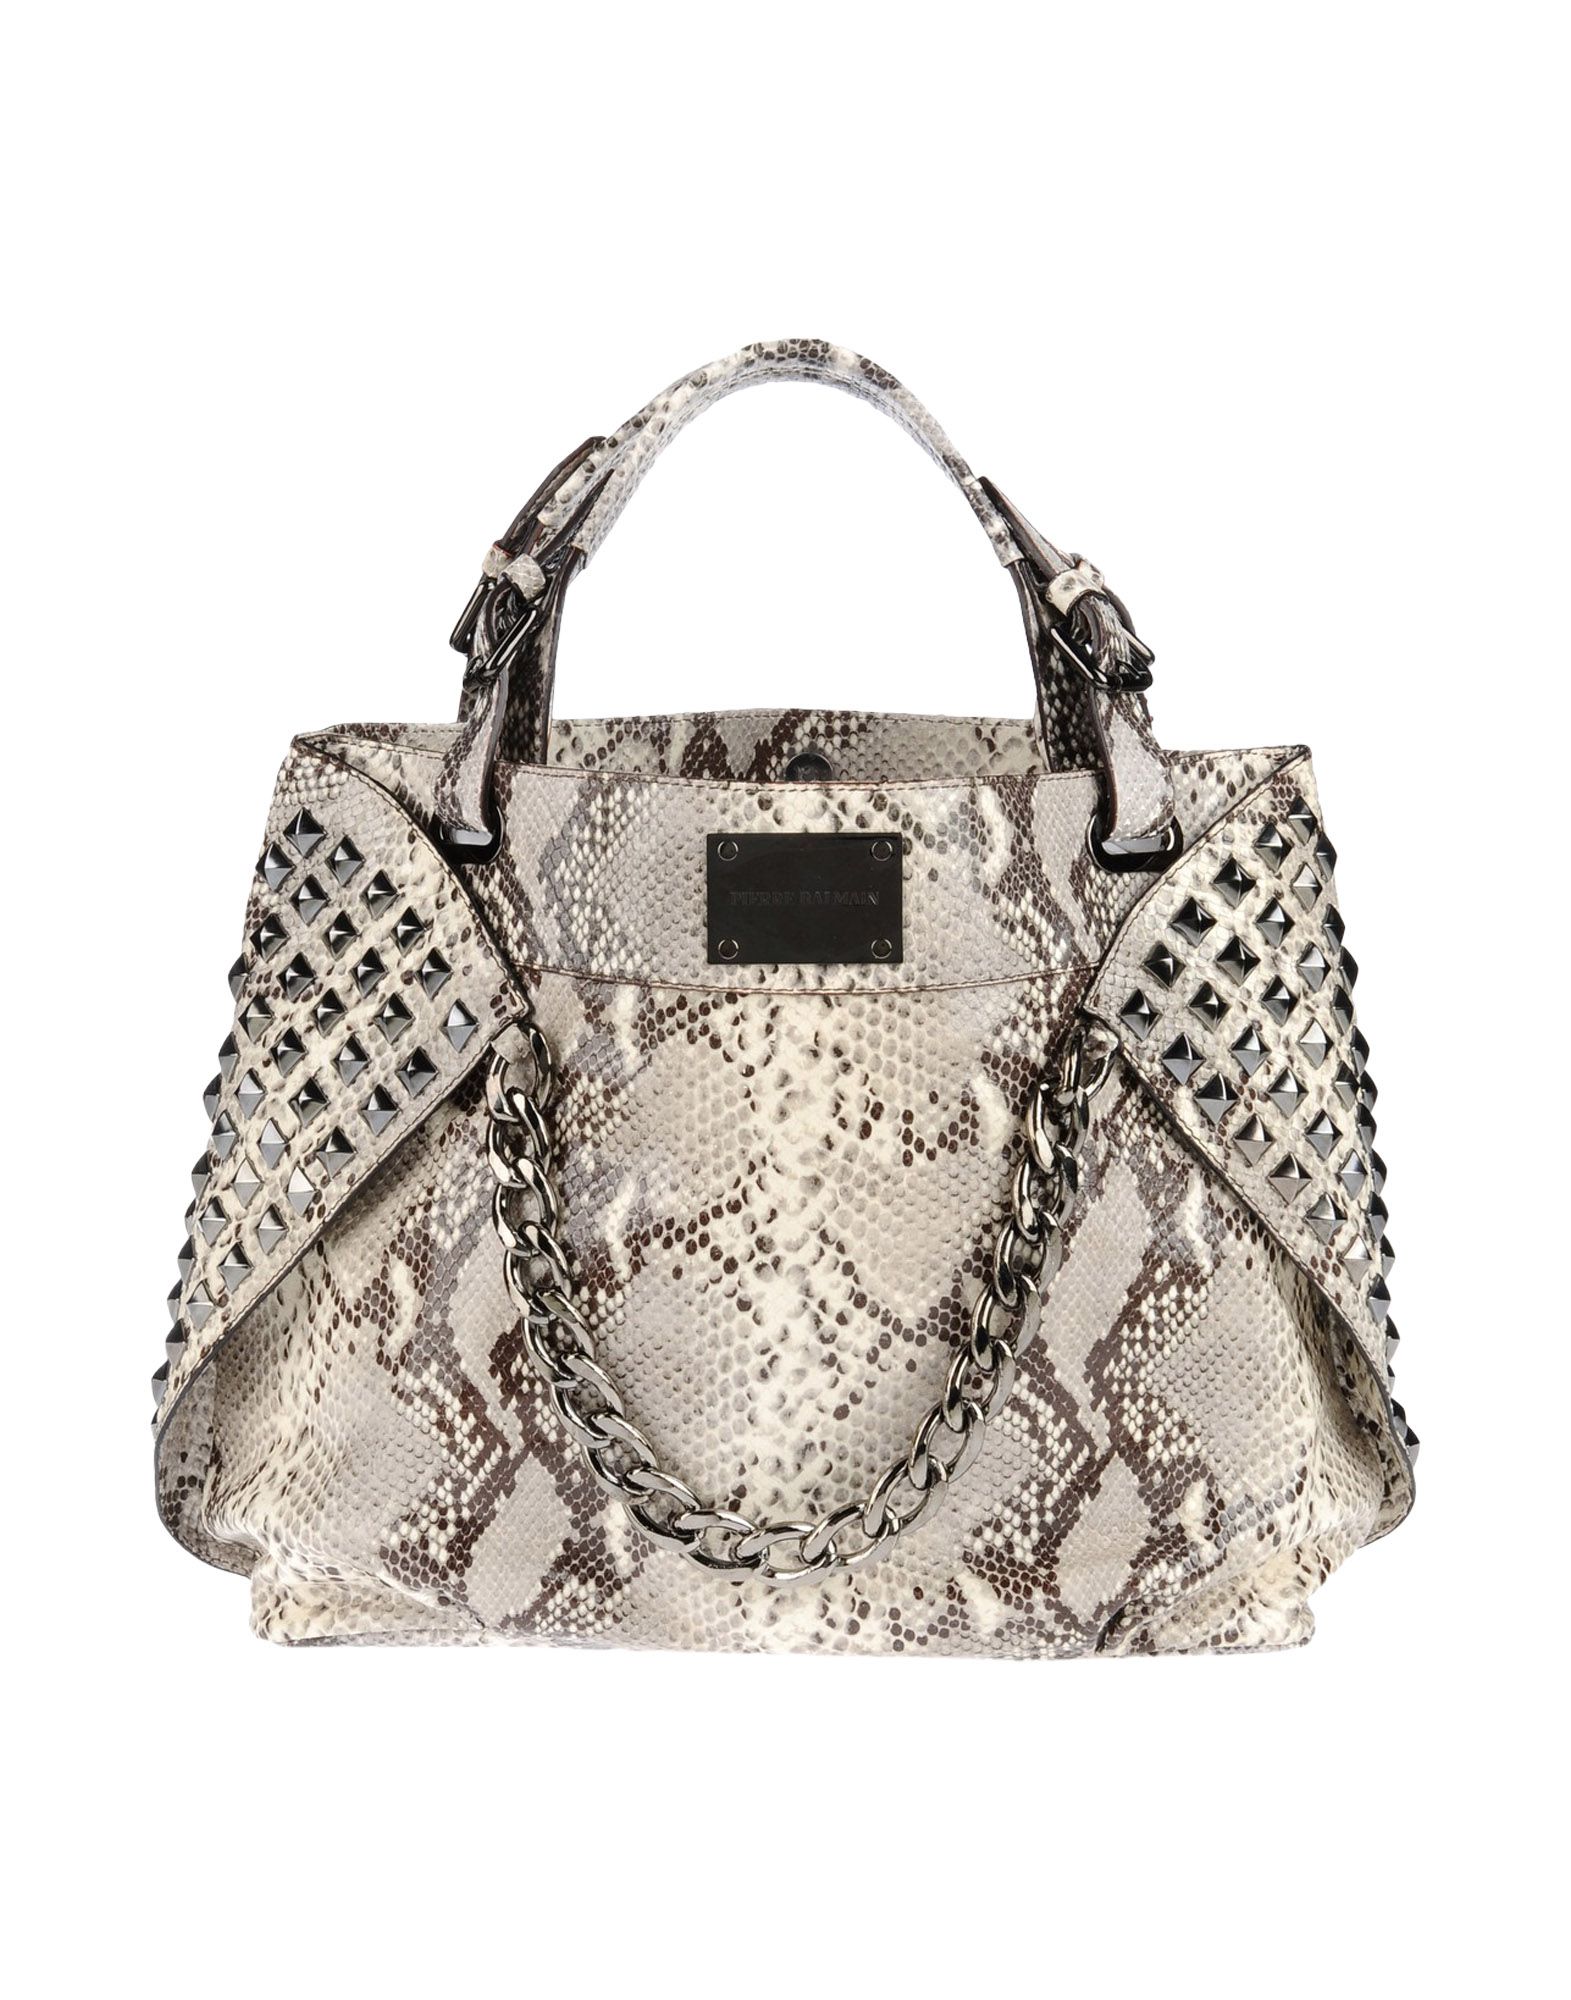 Balmain Studded Leather Tote in Light Grey (Gray) - Lyst